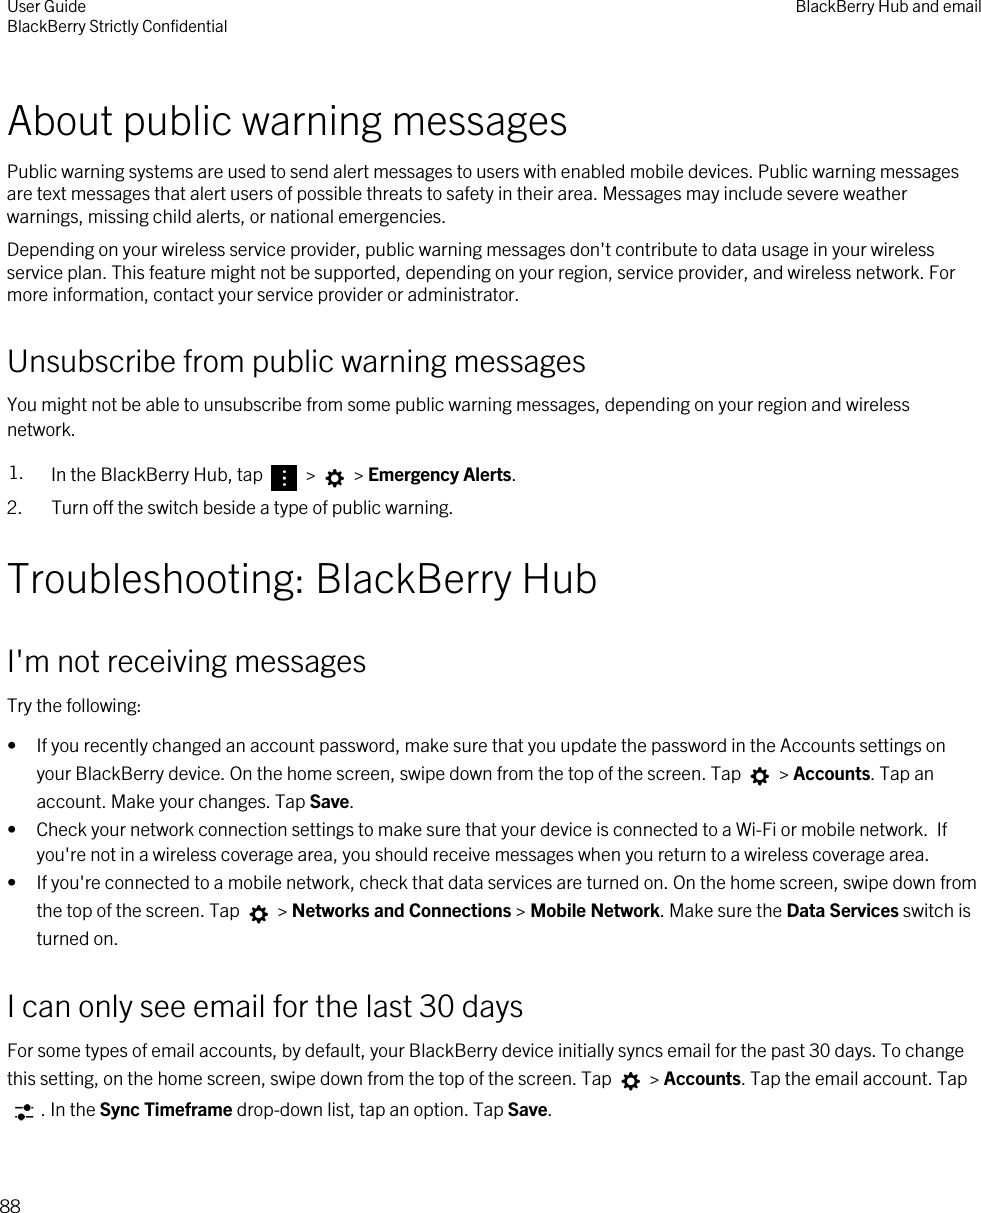 About public warning messagesPublic warning systems are used to send alert messages to users with enabled mobile devices. Public warning messages are text messages that alert users of possible threats to safety in their area. Messages may include severe weather warnings, missing child alerts, or national emergencies.Depending on your wireless service provider, public warning messages don&apos;t contribute to data usage in your wireless service plan. This feature might not be supported, depending on your region, service provider, and wireless network. For more information, contact your service provider or administrator.Unsubscribe from public warning messagesYou might not be able to unsubscribe from some public warning messages, depending on your region and wireless network.1. In the BlackBerry Hub, tap   &gt;   &gt; Emergency Alerts.2. Turn off the switch beside a type of public warning.Troubleshooting: BlackBerry HubI&apos;m not receiving messagesTry the following:• If you recently changed an account password, make sure that you update the password in the Accounts settings on your BlackBerry device. On the home screen, swipe down from the top of the screen. Tap   &gt; Accounts. Tap an account. Make your changes. Tap Save.• Check your network connection settings to make sure that your device is connected to a Wi-Fi or mobile network.  If you&apos;re not in a wireless coverage area, you should receive messages when you return to a wireless coverage area.• If you&apos;re connected to a mobile network, check that data services are turned on. On the home screen, swipe down from the top of the screen. Tap   &gt; Networks and Connections &gt; Mobile Network. Make sure the Data Services switch is turned on.I can only see email for the last 30 daysFor some types of email accounts, by default, your BlackBerry device initially syncs email for the past 30 days. To change this setting, on the home screen, swipe down from the top of the screen. Tap   &gt; Accounts. Tap the email account. Tap . In the Sync Timeframe drop-down list, tap an option. Tap Save.User GuideBlackBerry Strictly Confidential BlackBerry Hub and email88